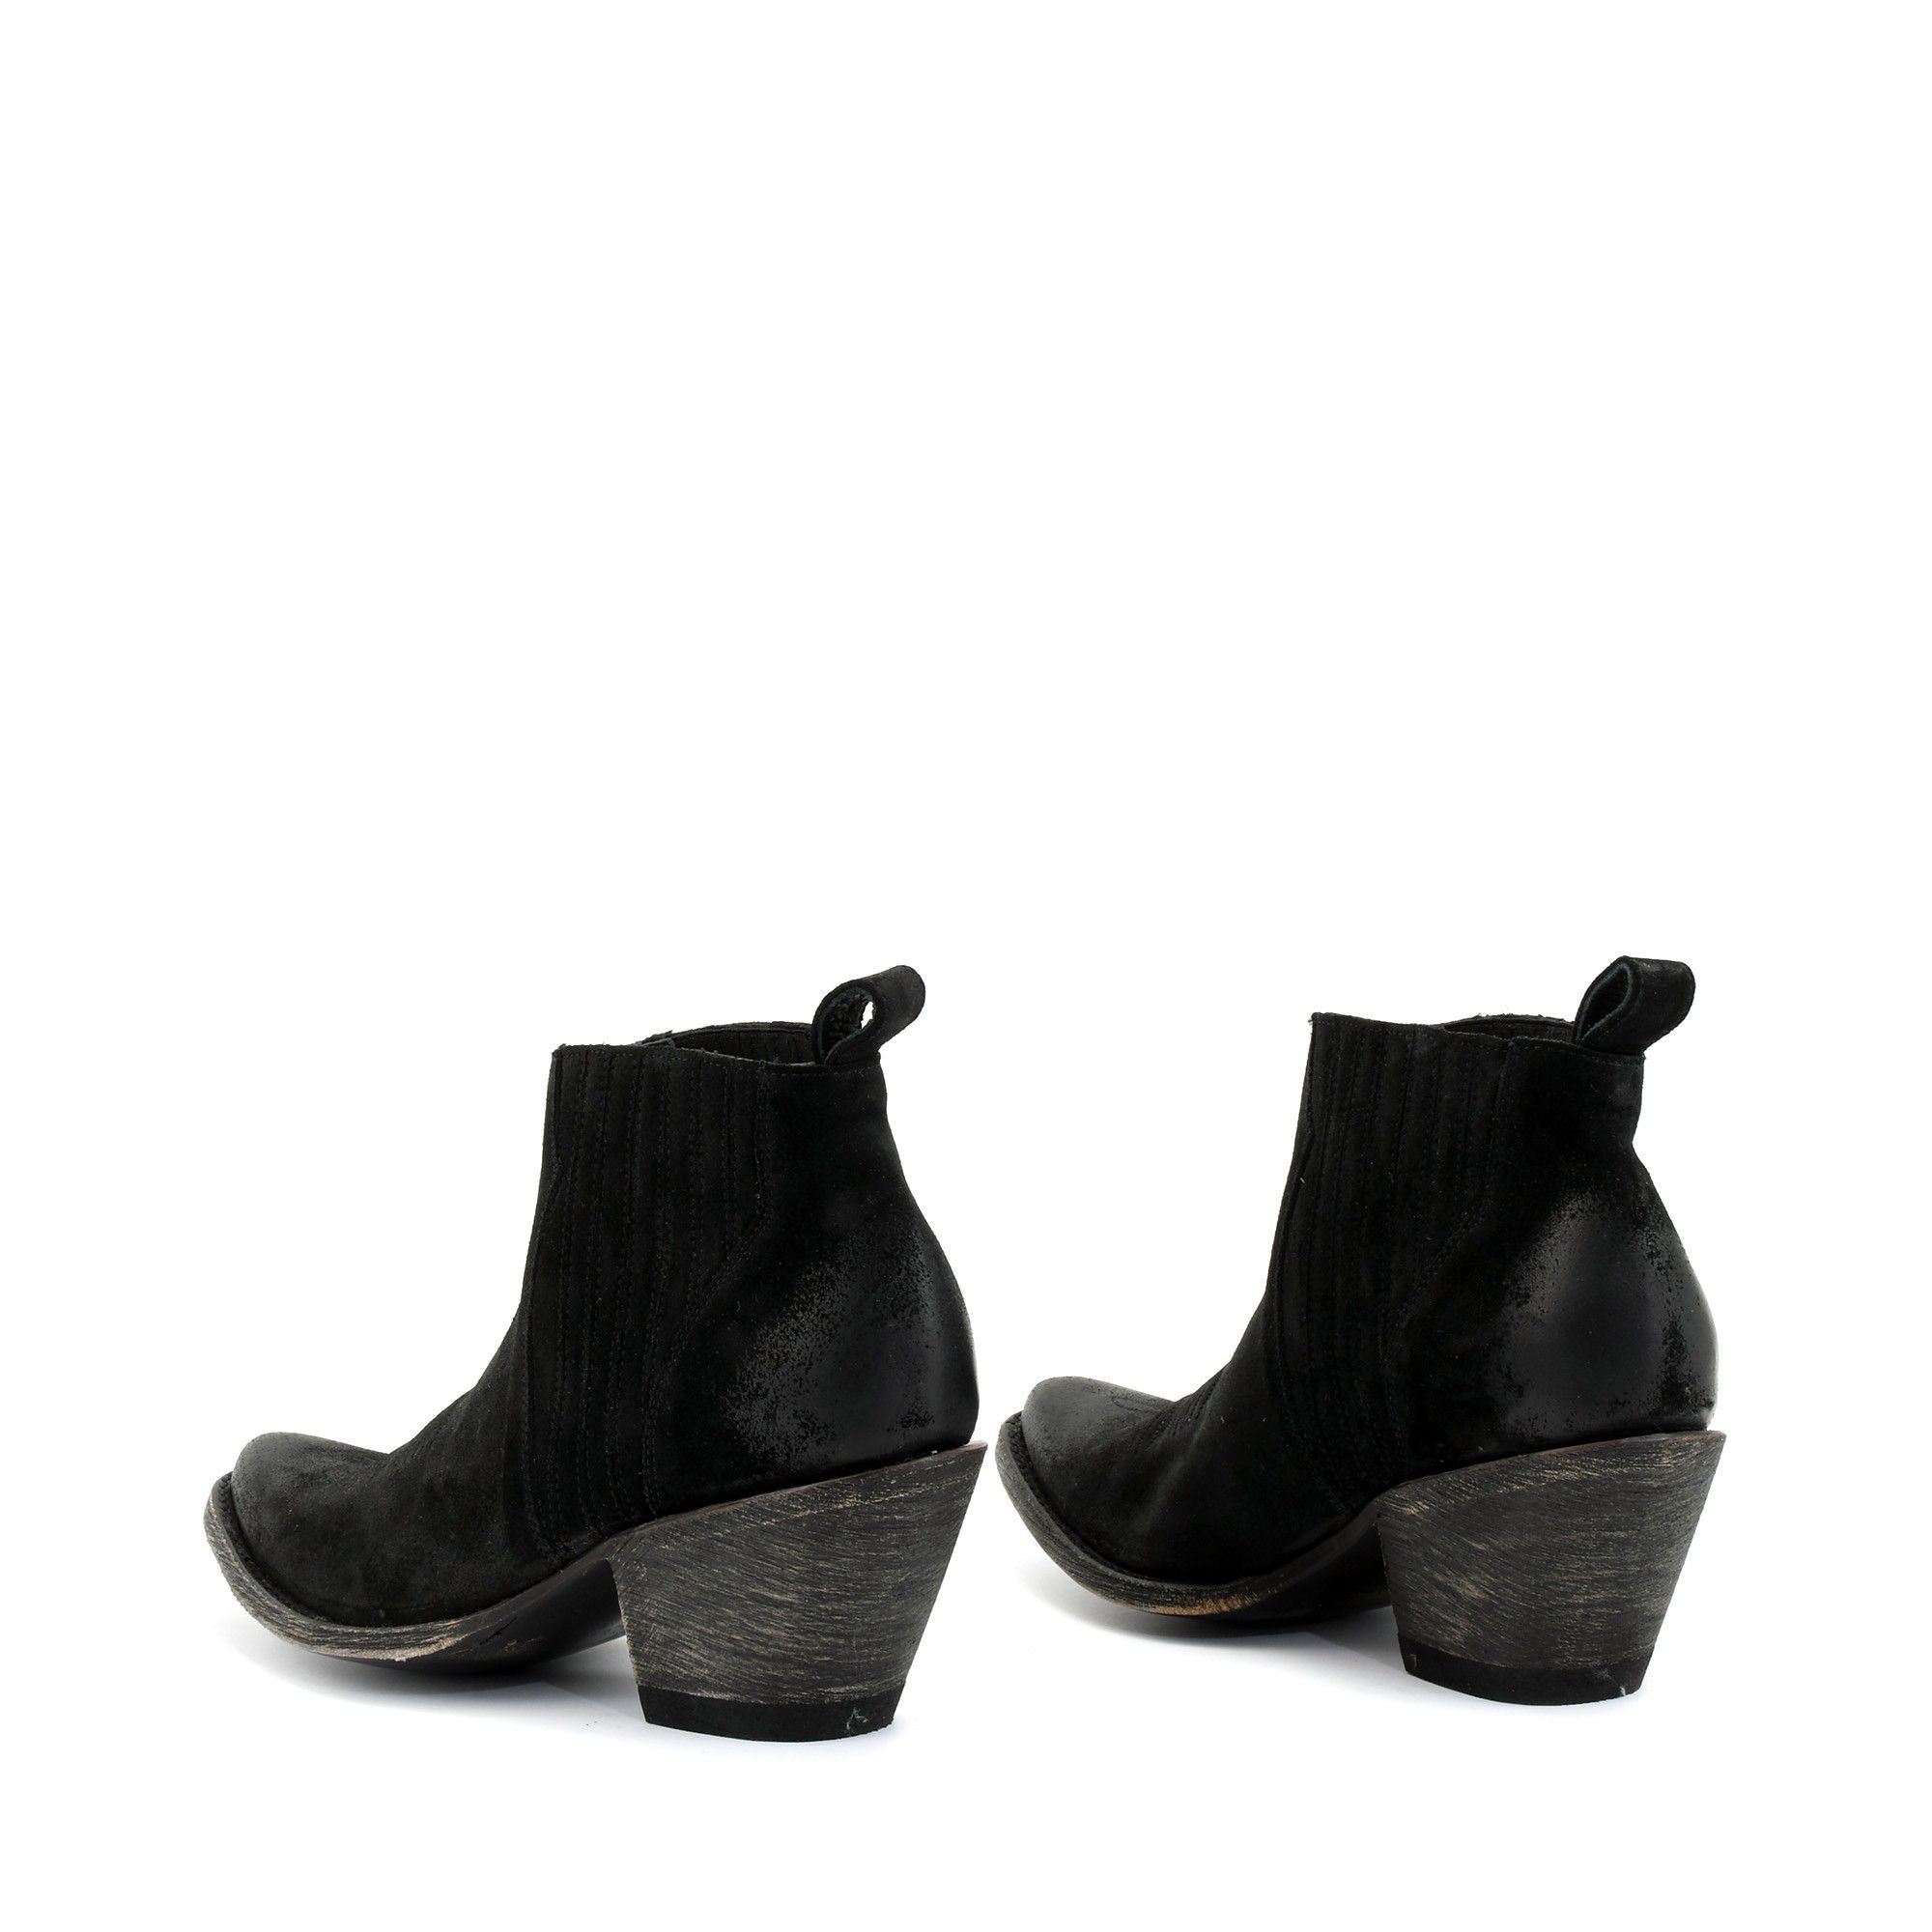 KRISTINNE BLACK TEA SUEDE POINTED TOE ANKLE BOOTS WITH COWBOY STYLE  STITCHING AND ELASTICIZED SIDES PANEL   Total heel height 2